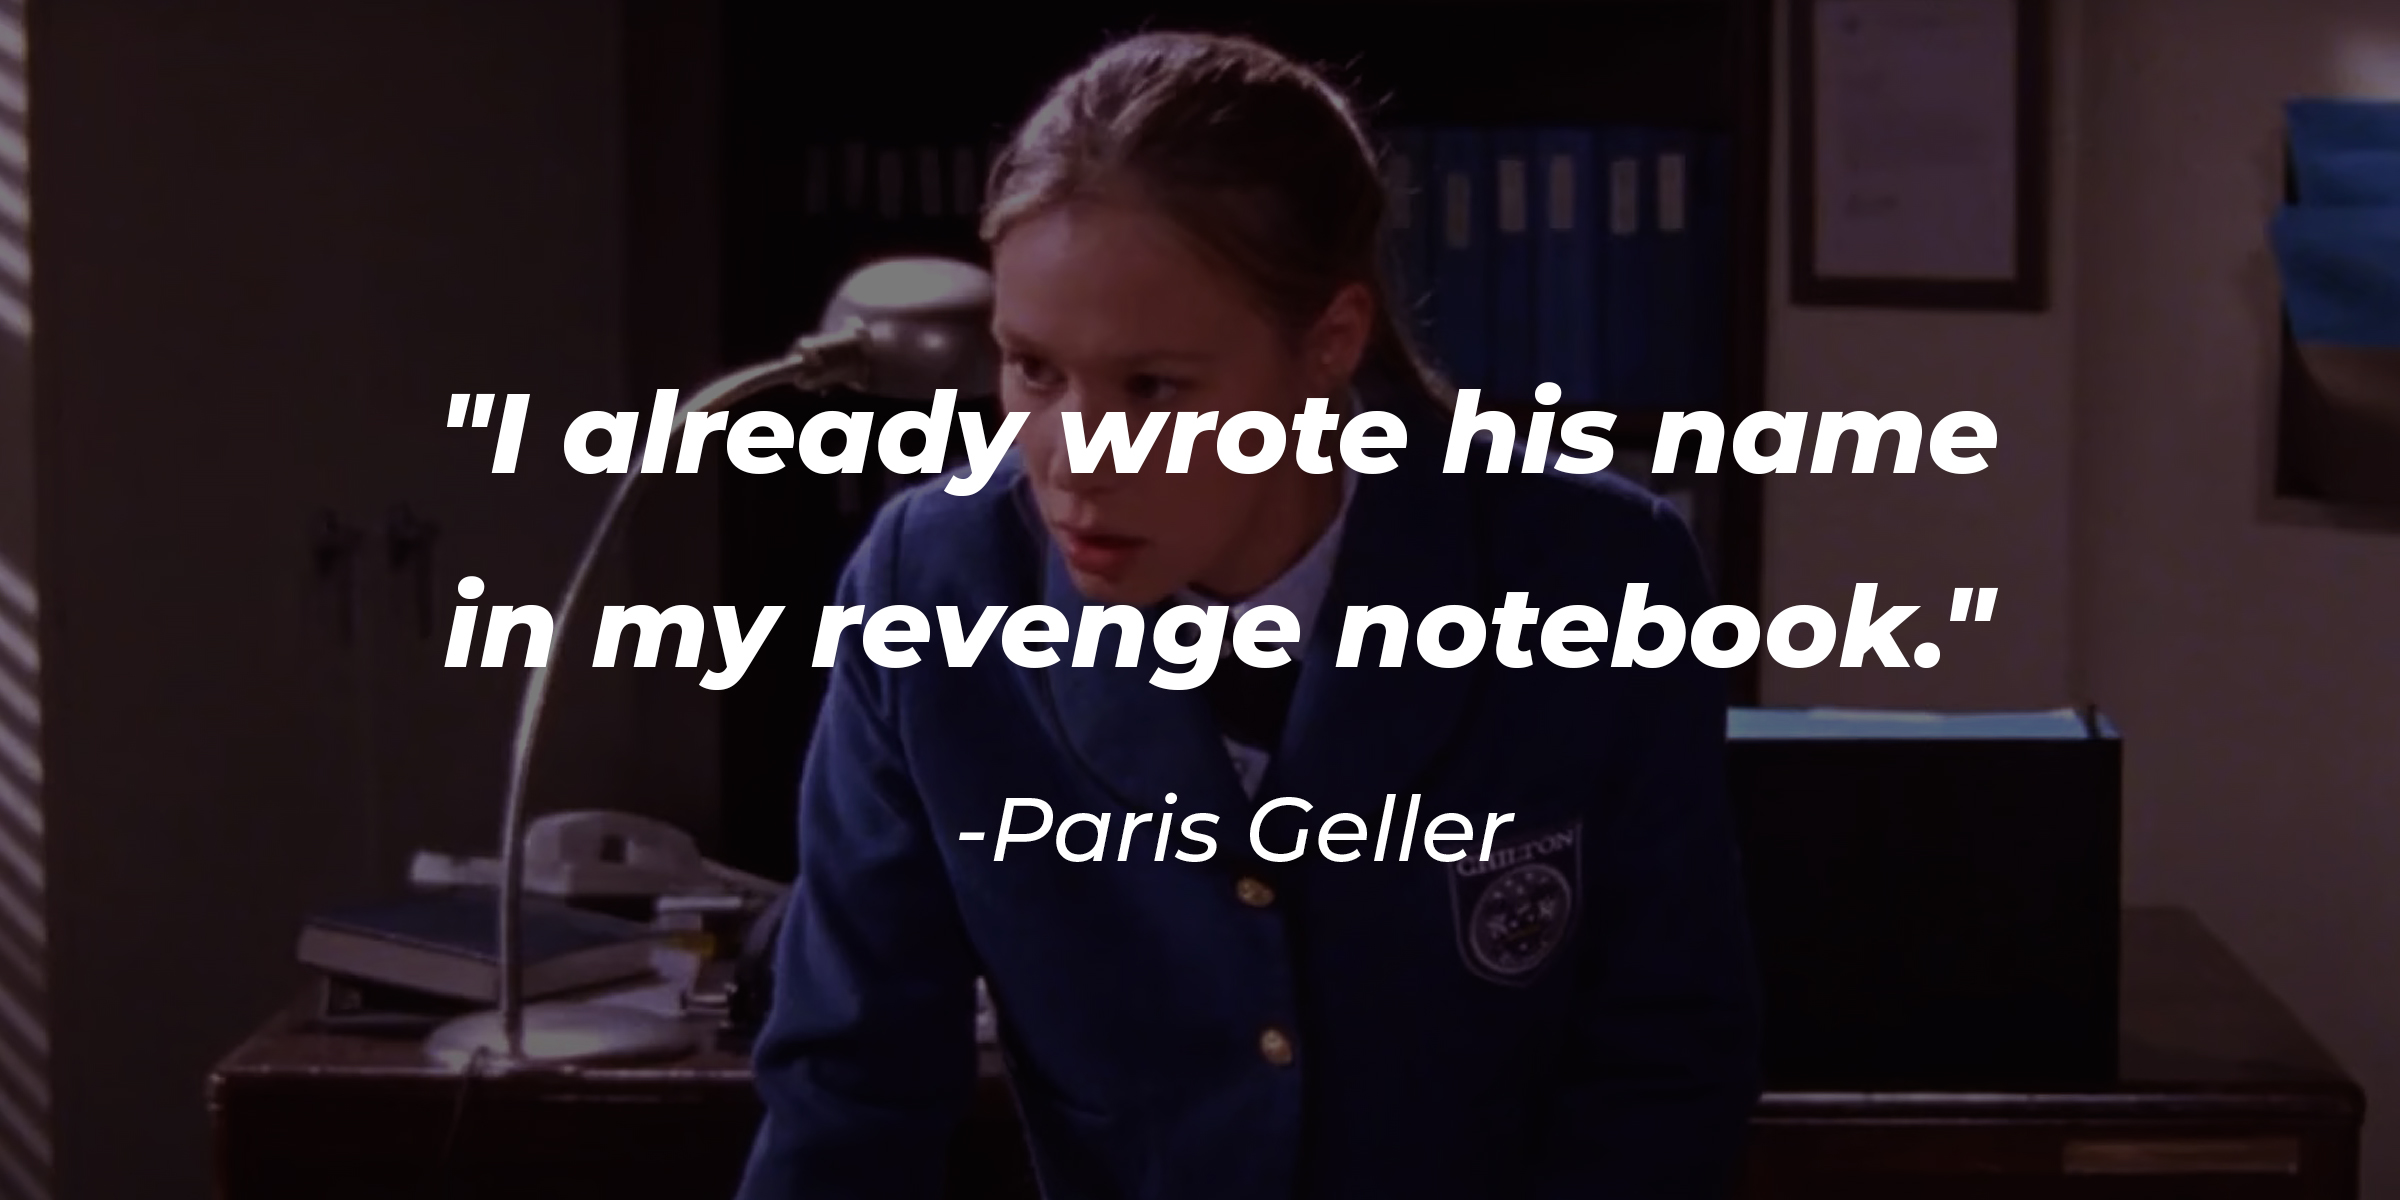 Paris Geller's image with the quote: "I already wrote his name in my revenge notebook." | Source: facebook.com/GilmoreGirls